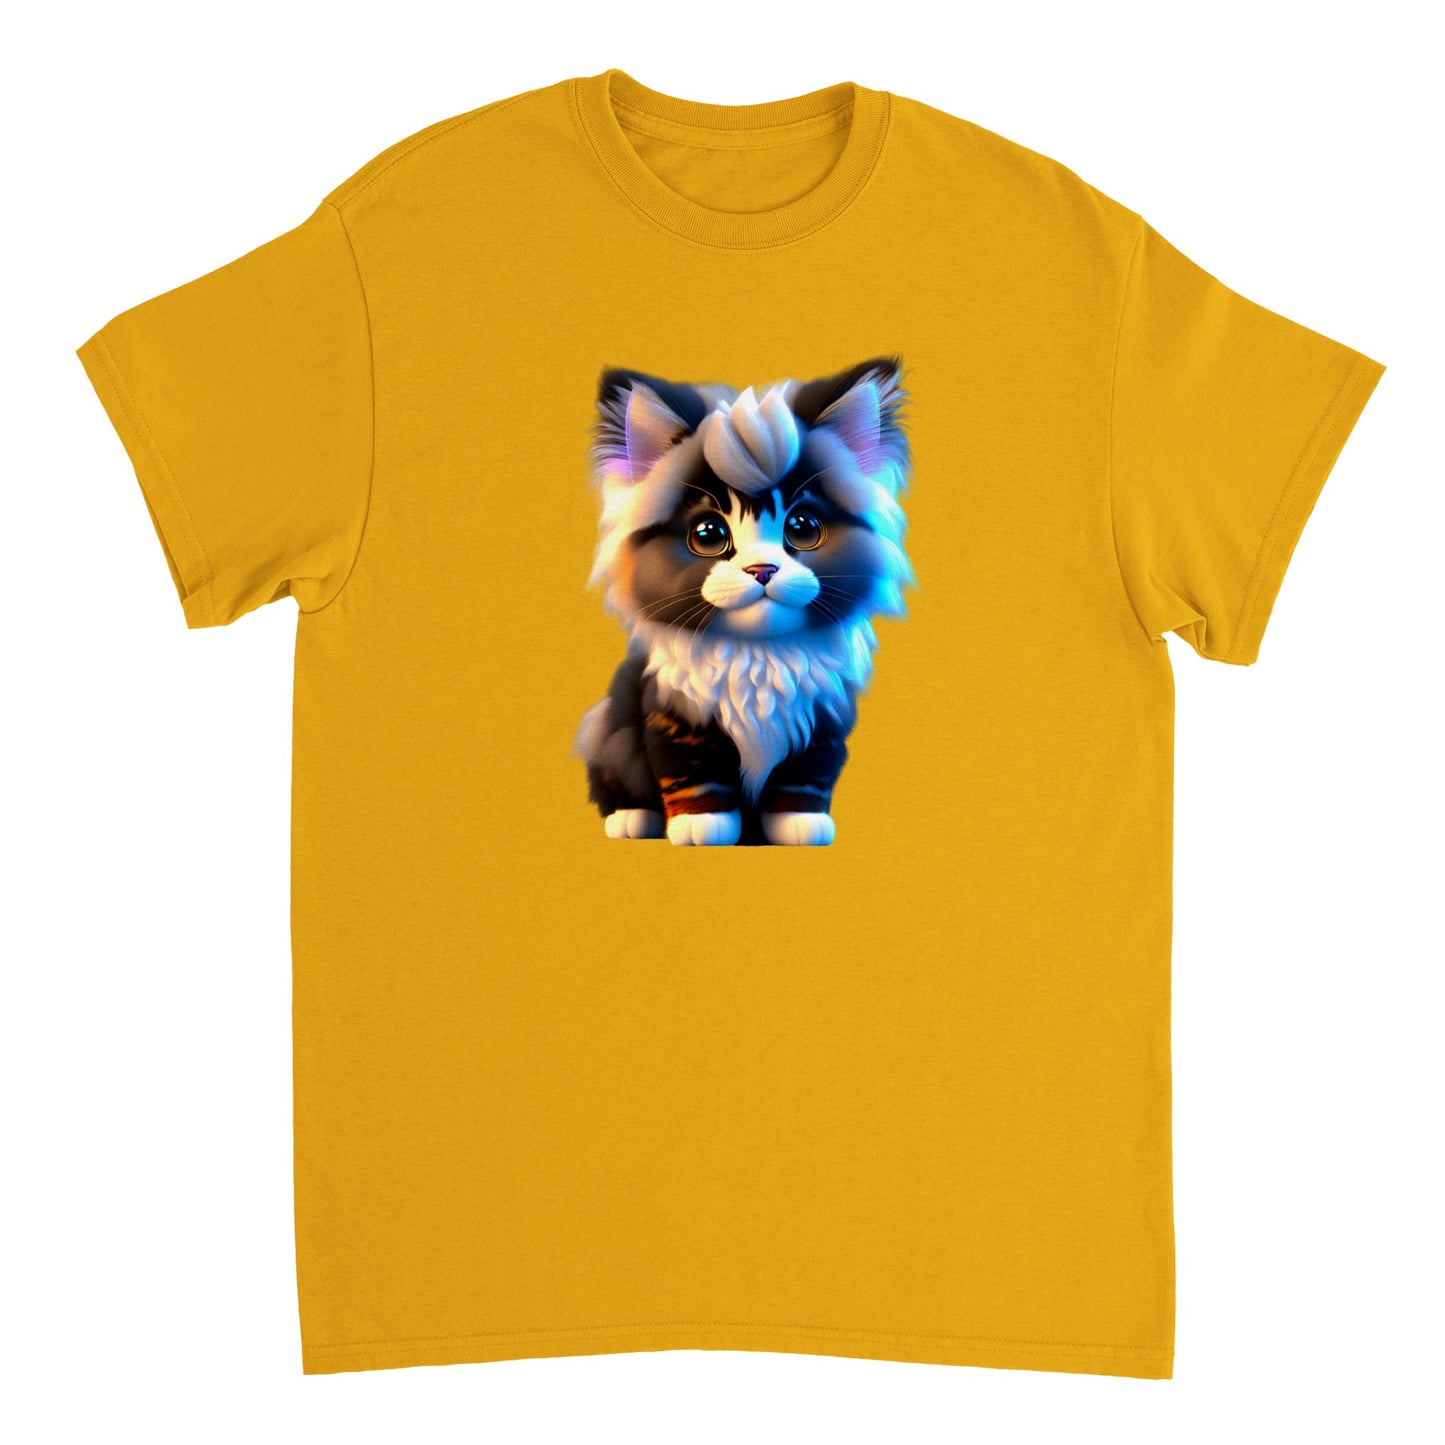 Adorable, Cool, Cute Cats and Kittens Toy - Heavyweight Unisex Crewneck T-shirt 10